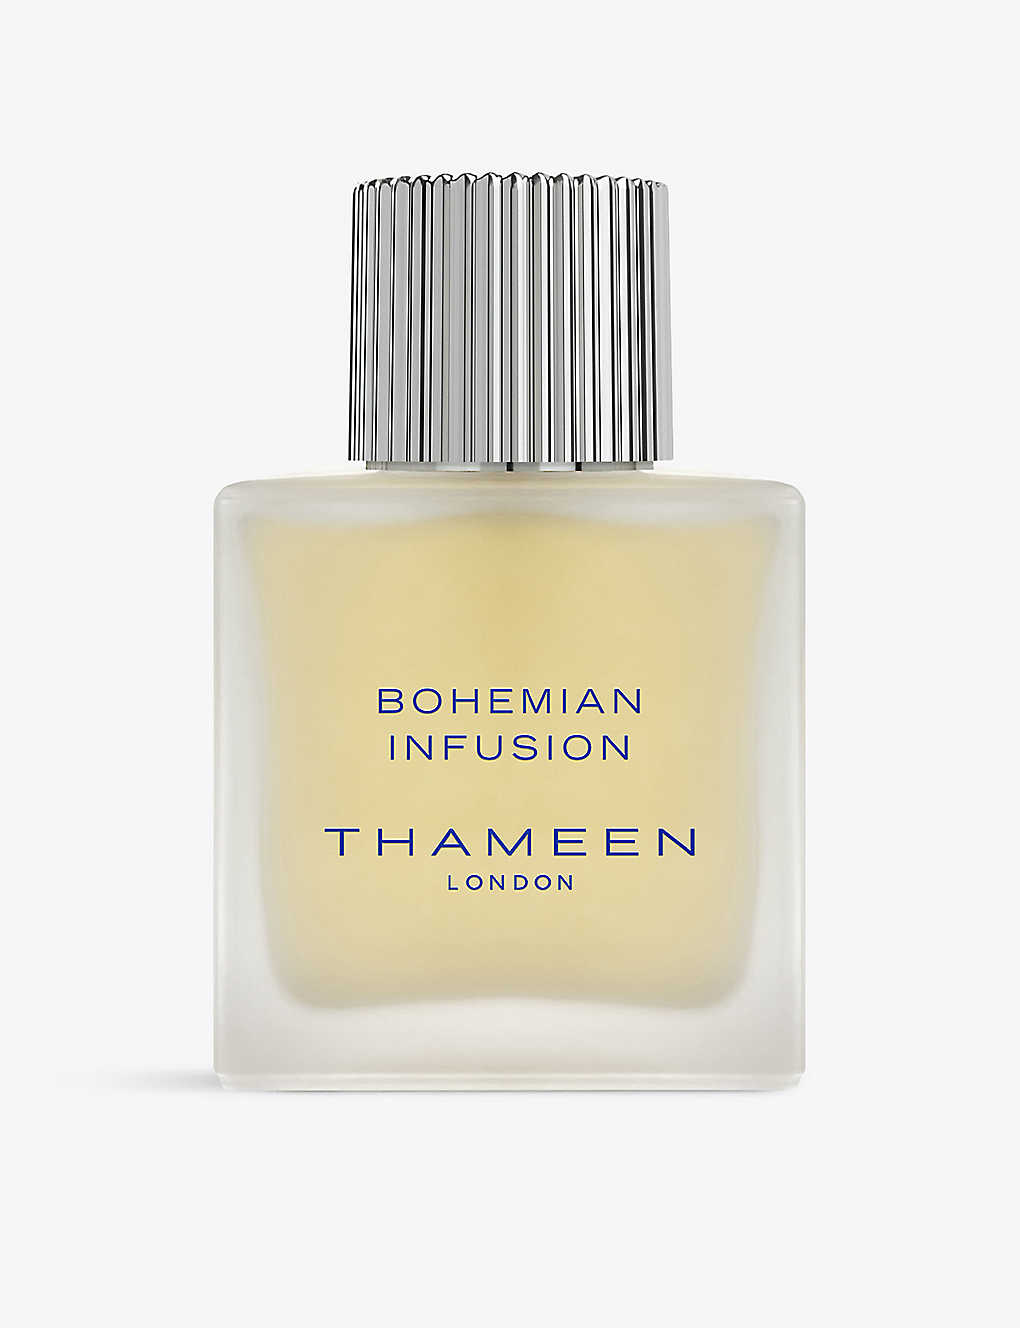 Thameen Bohemian Infusion Cologne